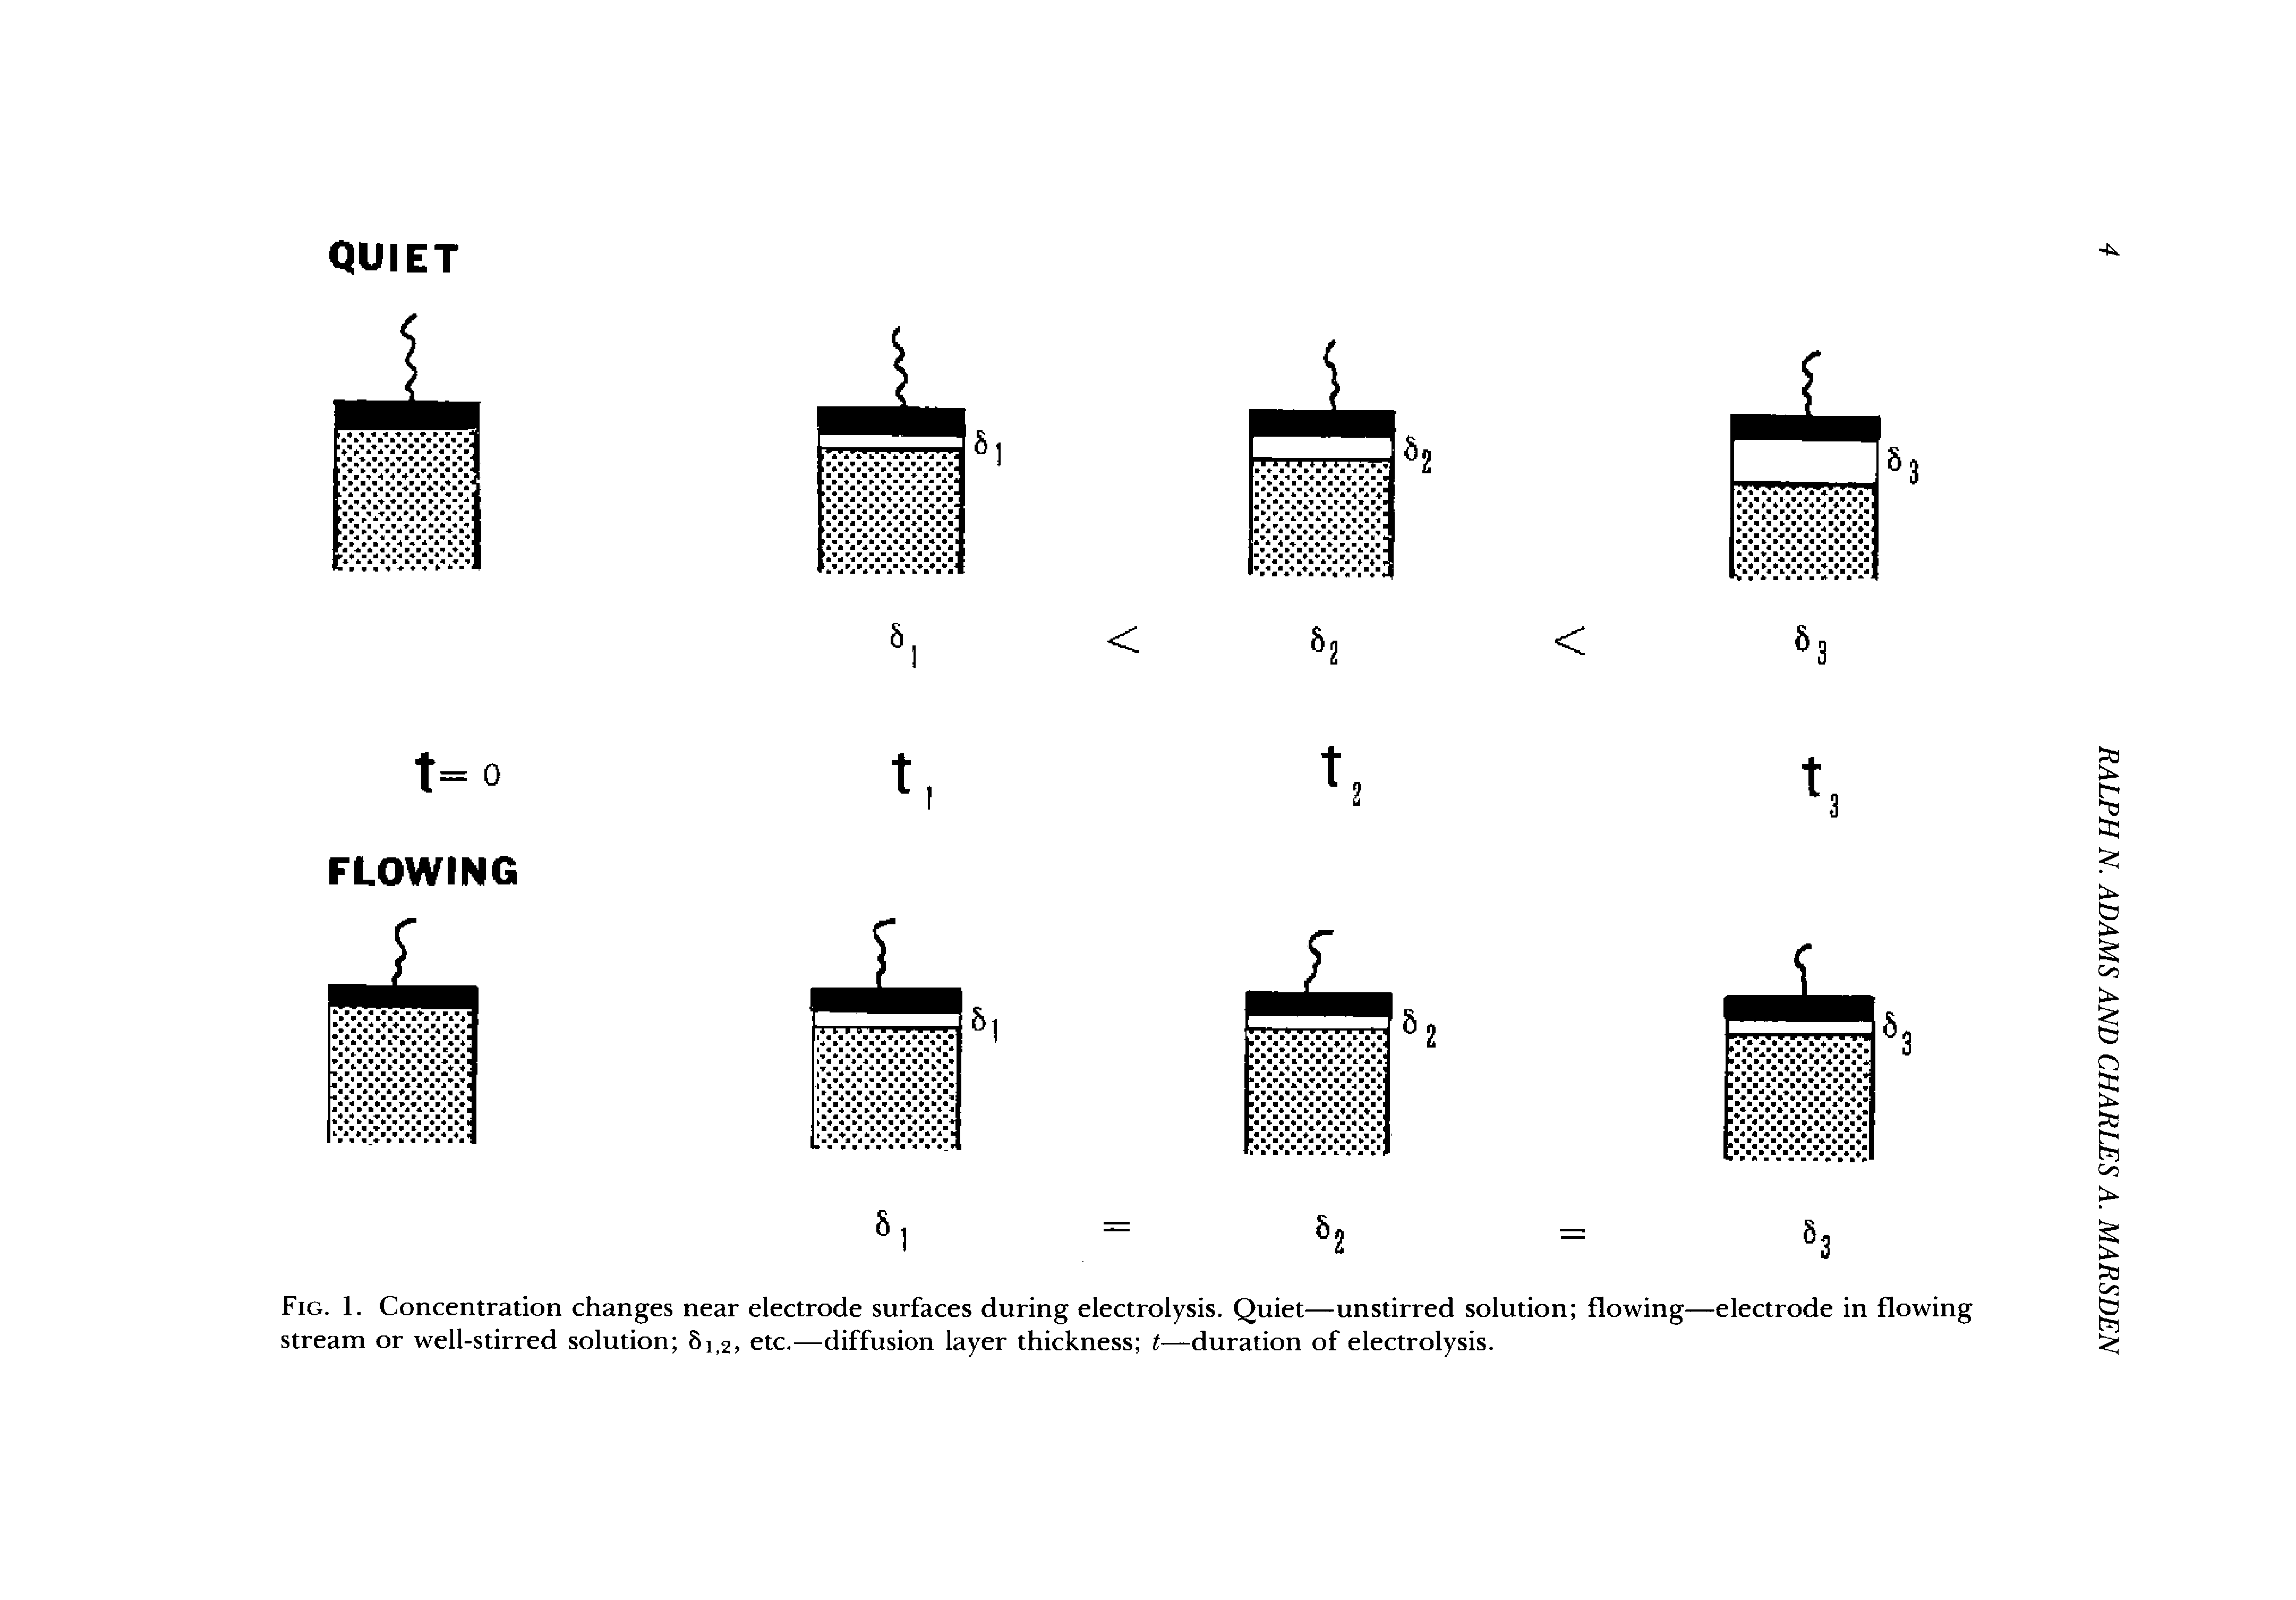 Fig. 1. Concentration changes near electrode surfaces during electrolysis. Quiet—unstirred solution flowing—electrode in flowing stream or well-stirred solution 81,2, etc.—diffusion layer thickness t—duration of electrolysis.